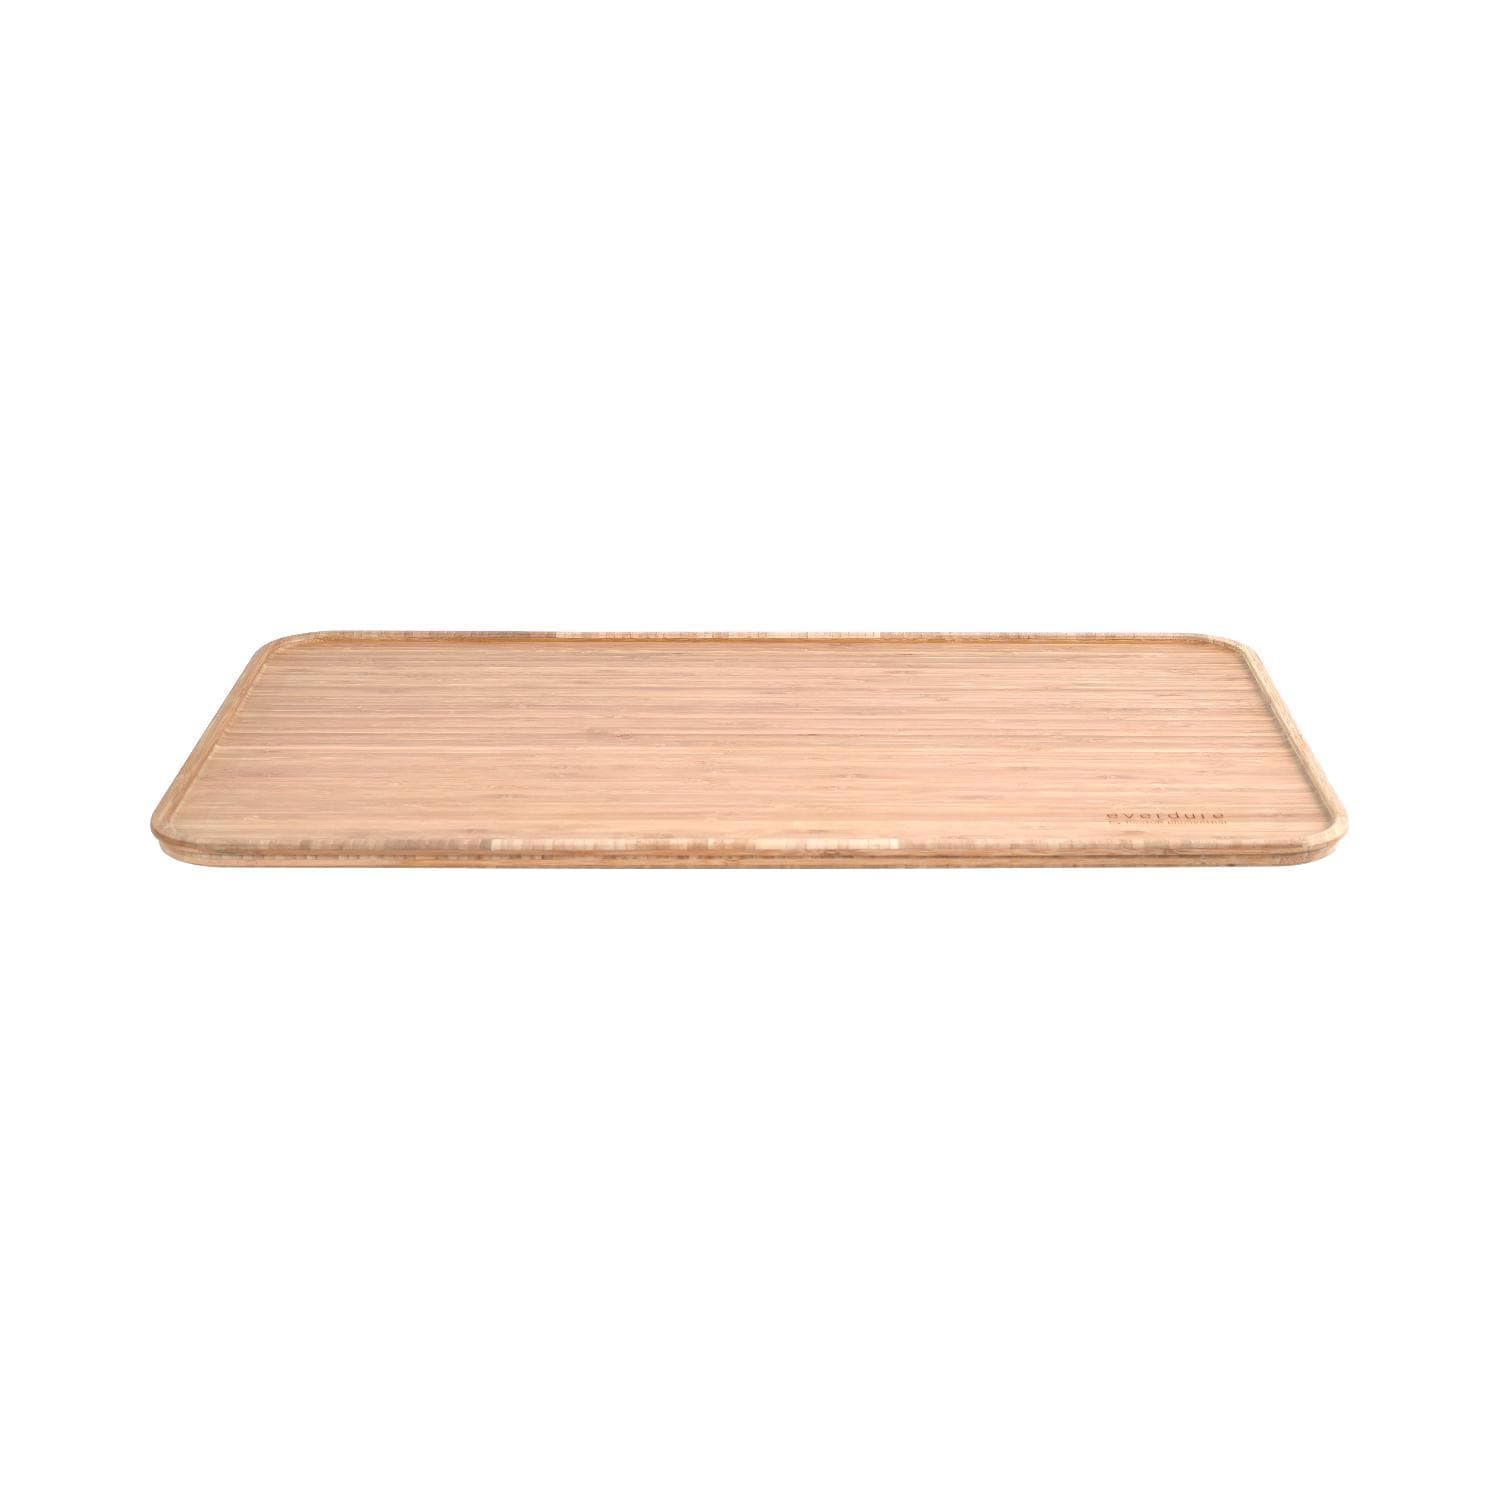 Everdure Grill Accessories Everdure By Heston Blumenthal Bamboo Table Insert For FUSION 29-Inch Charcoal Grill Pedestal